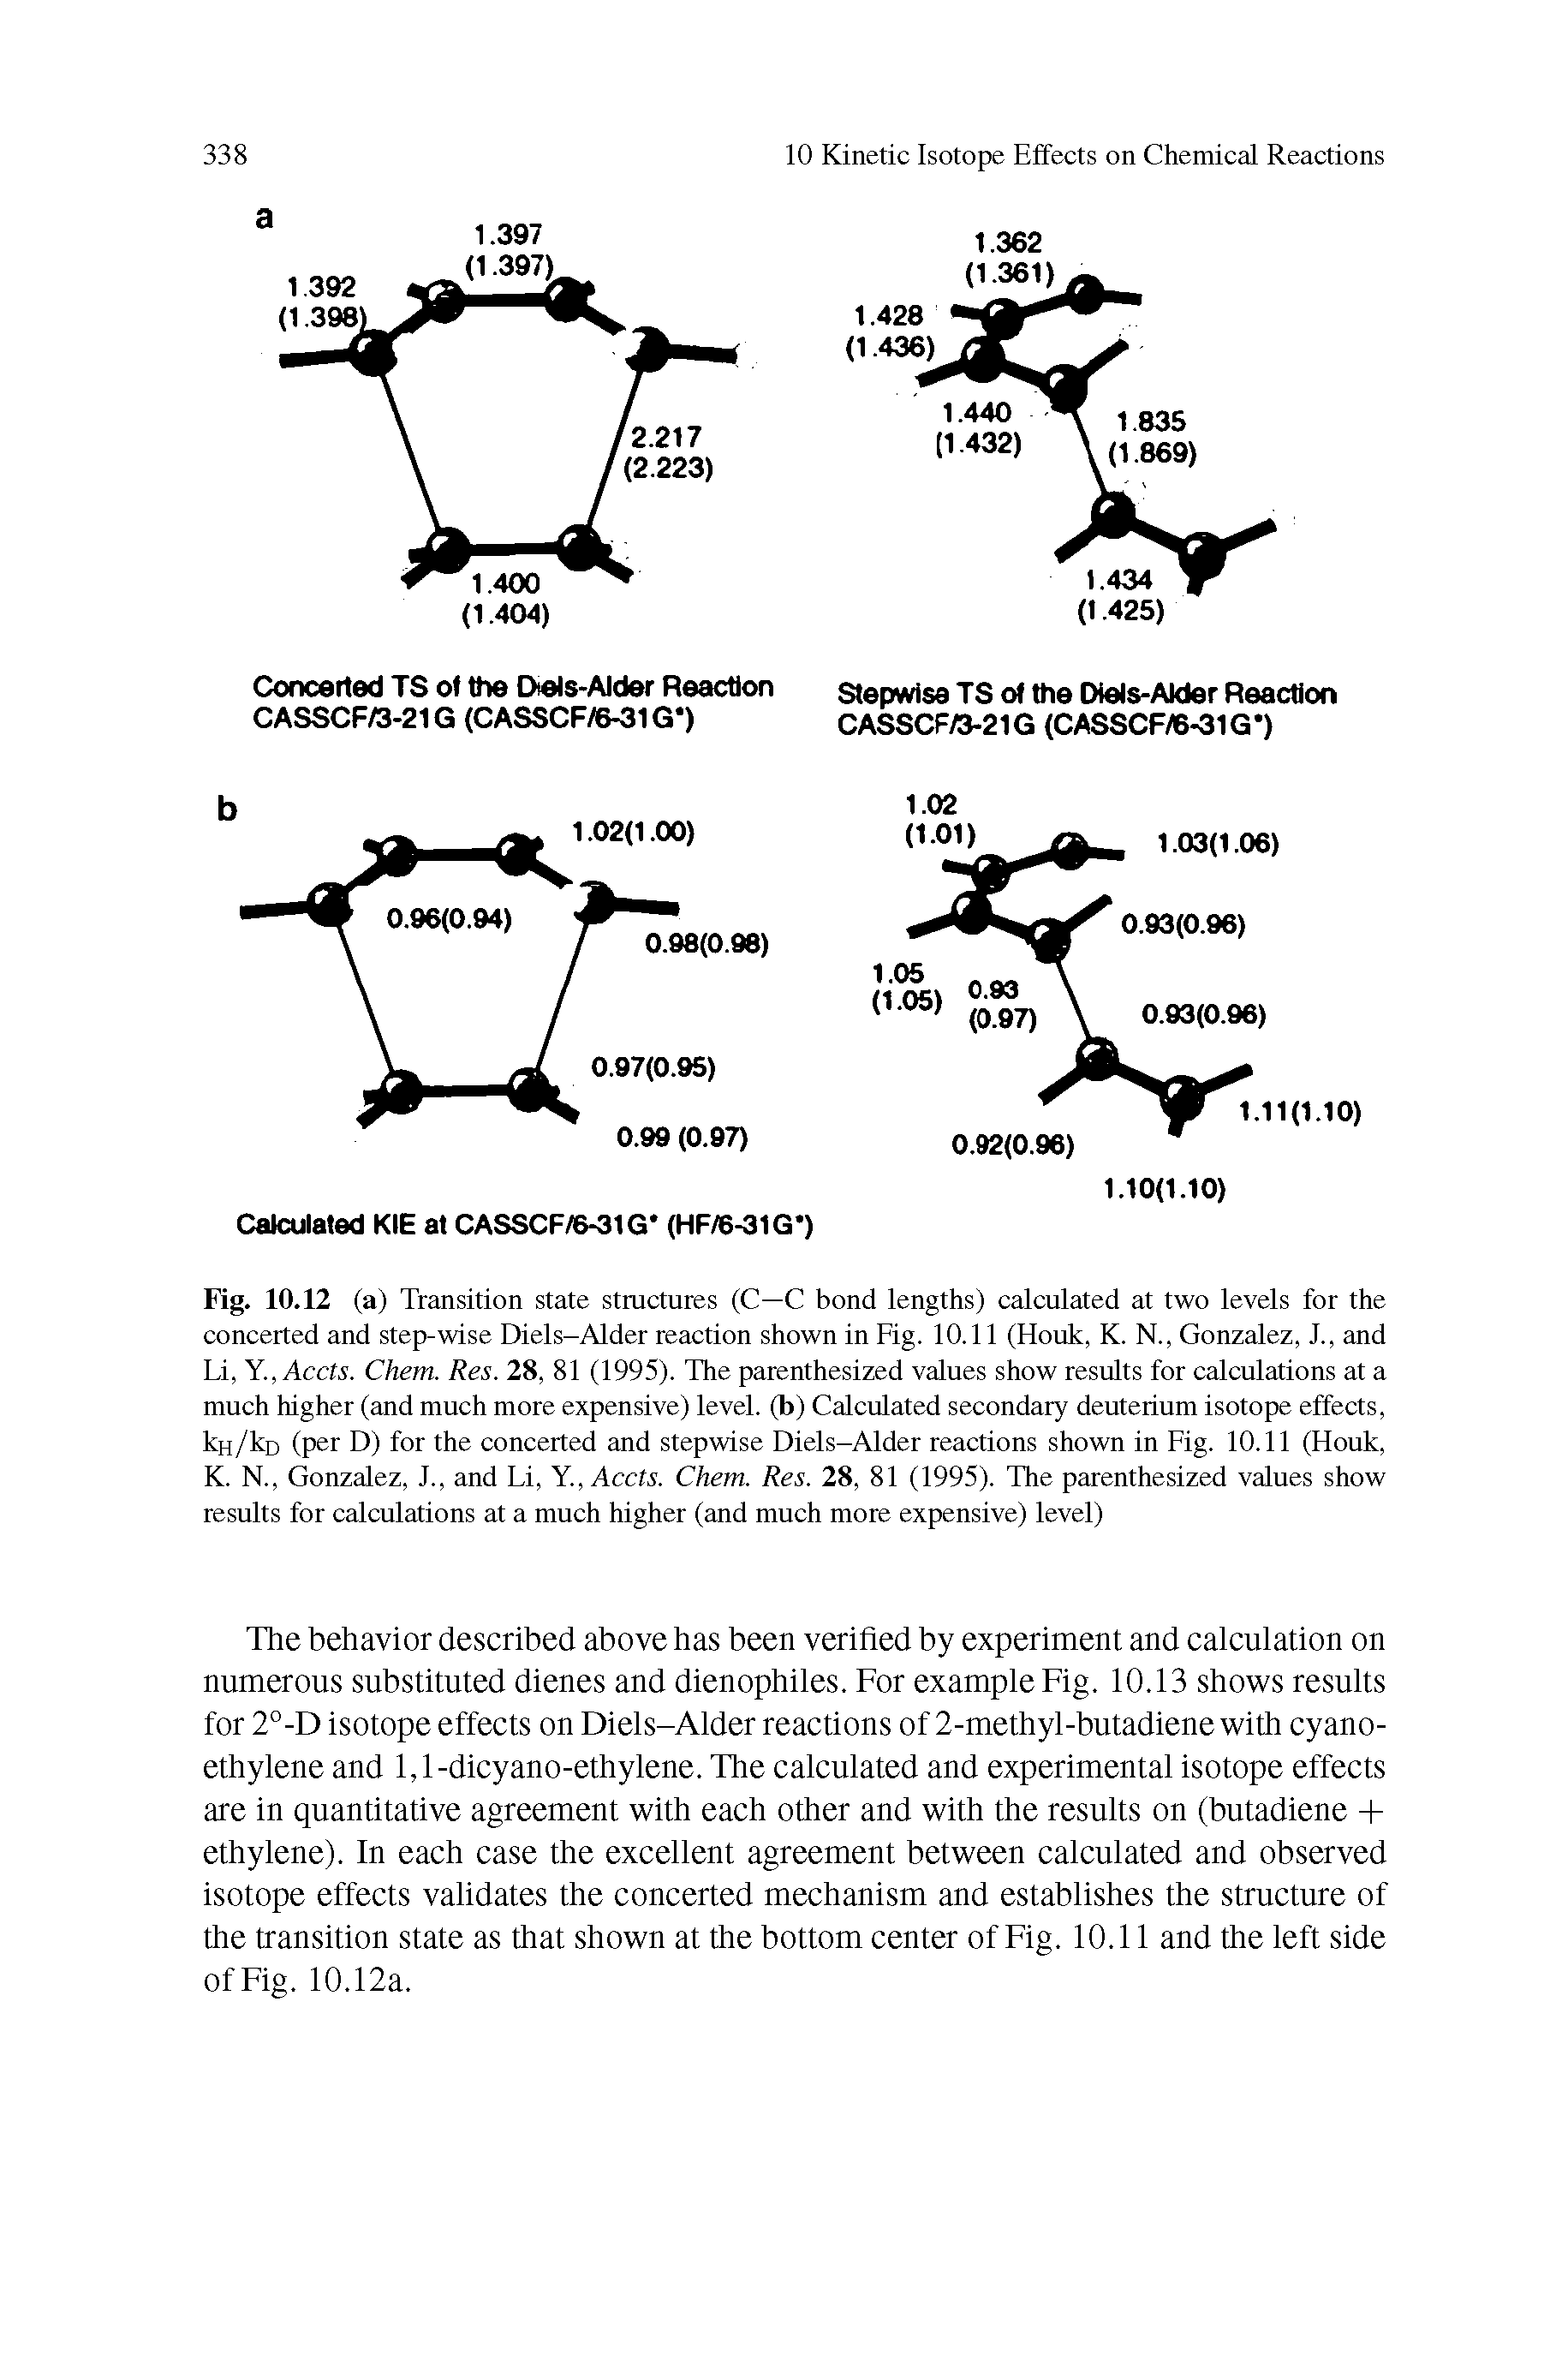 Fig. 10.12 (a) Transition state structures (C—C bond lengths) calculated at two levels for the concerted and step-wise Diels-Alder reaction shown in Fig. 10.11 (Houk, K. N., Gonzalez, J., and Li, Y,Accts. Chem. Res. 28, 81 (1995). The parenthesized values show results for calculations at a much higher (and much more expensive) level, (b) Calculated secondary deuterium isotope effects, kH/kD (per D) for the concerted and stepwise Diels-Alder reactions shown in Fig. 10.11 (Houk, K. N., Gonzalez, J., and Li, Y,Accts. Chem. Res. 28, 81 (1995). The parenthesized values show results for calculations at a much higher (and much more expensive) level)...